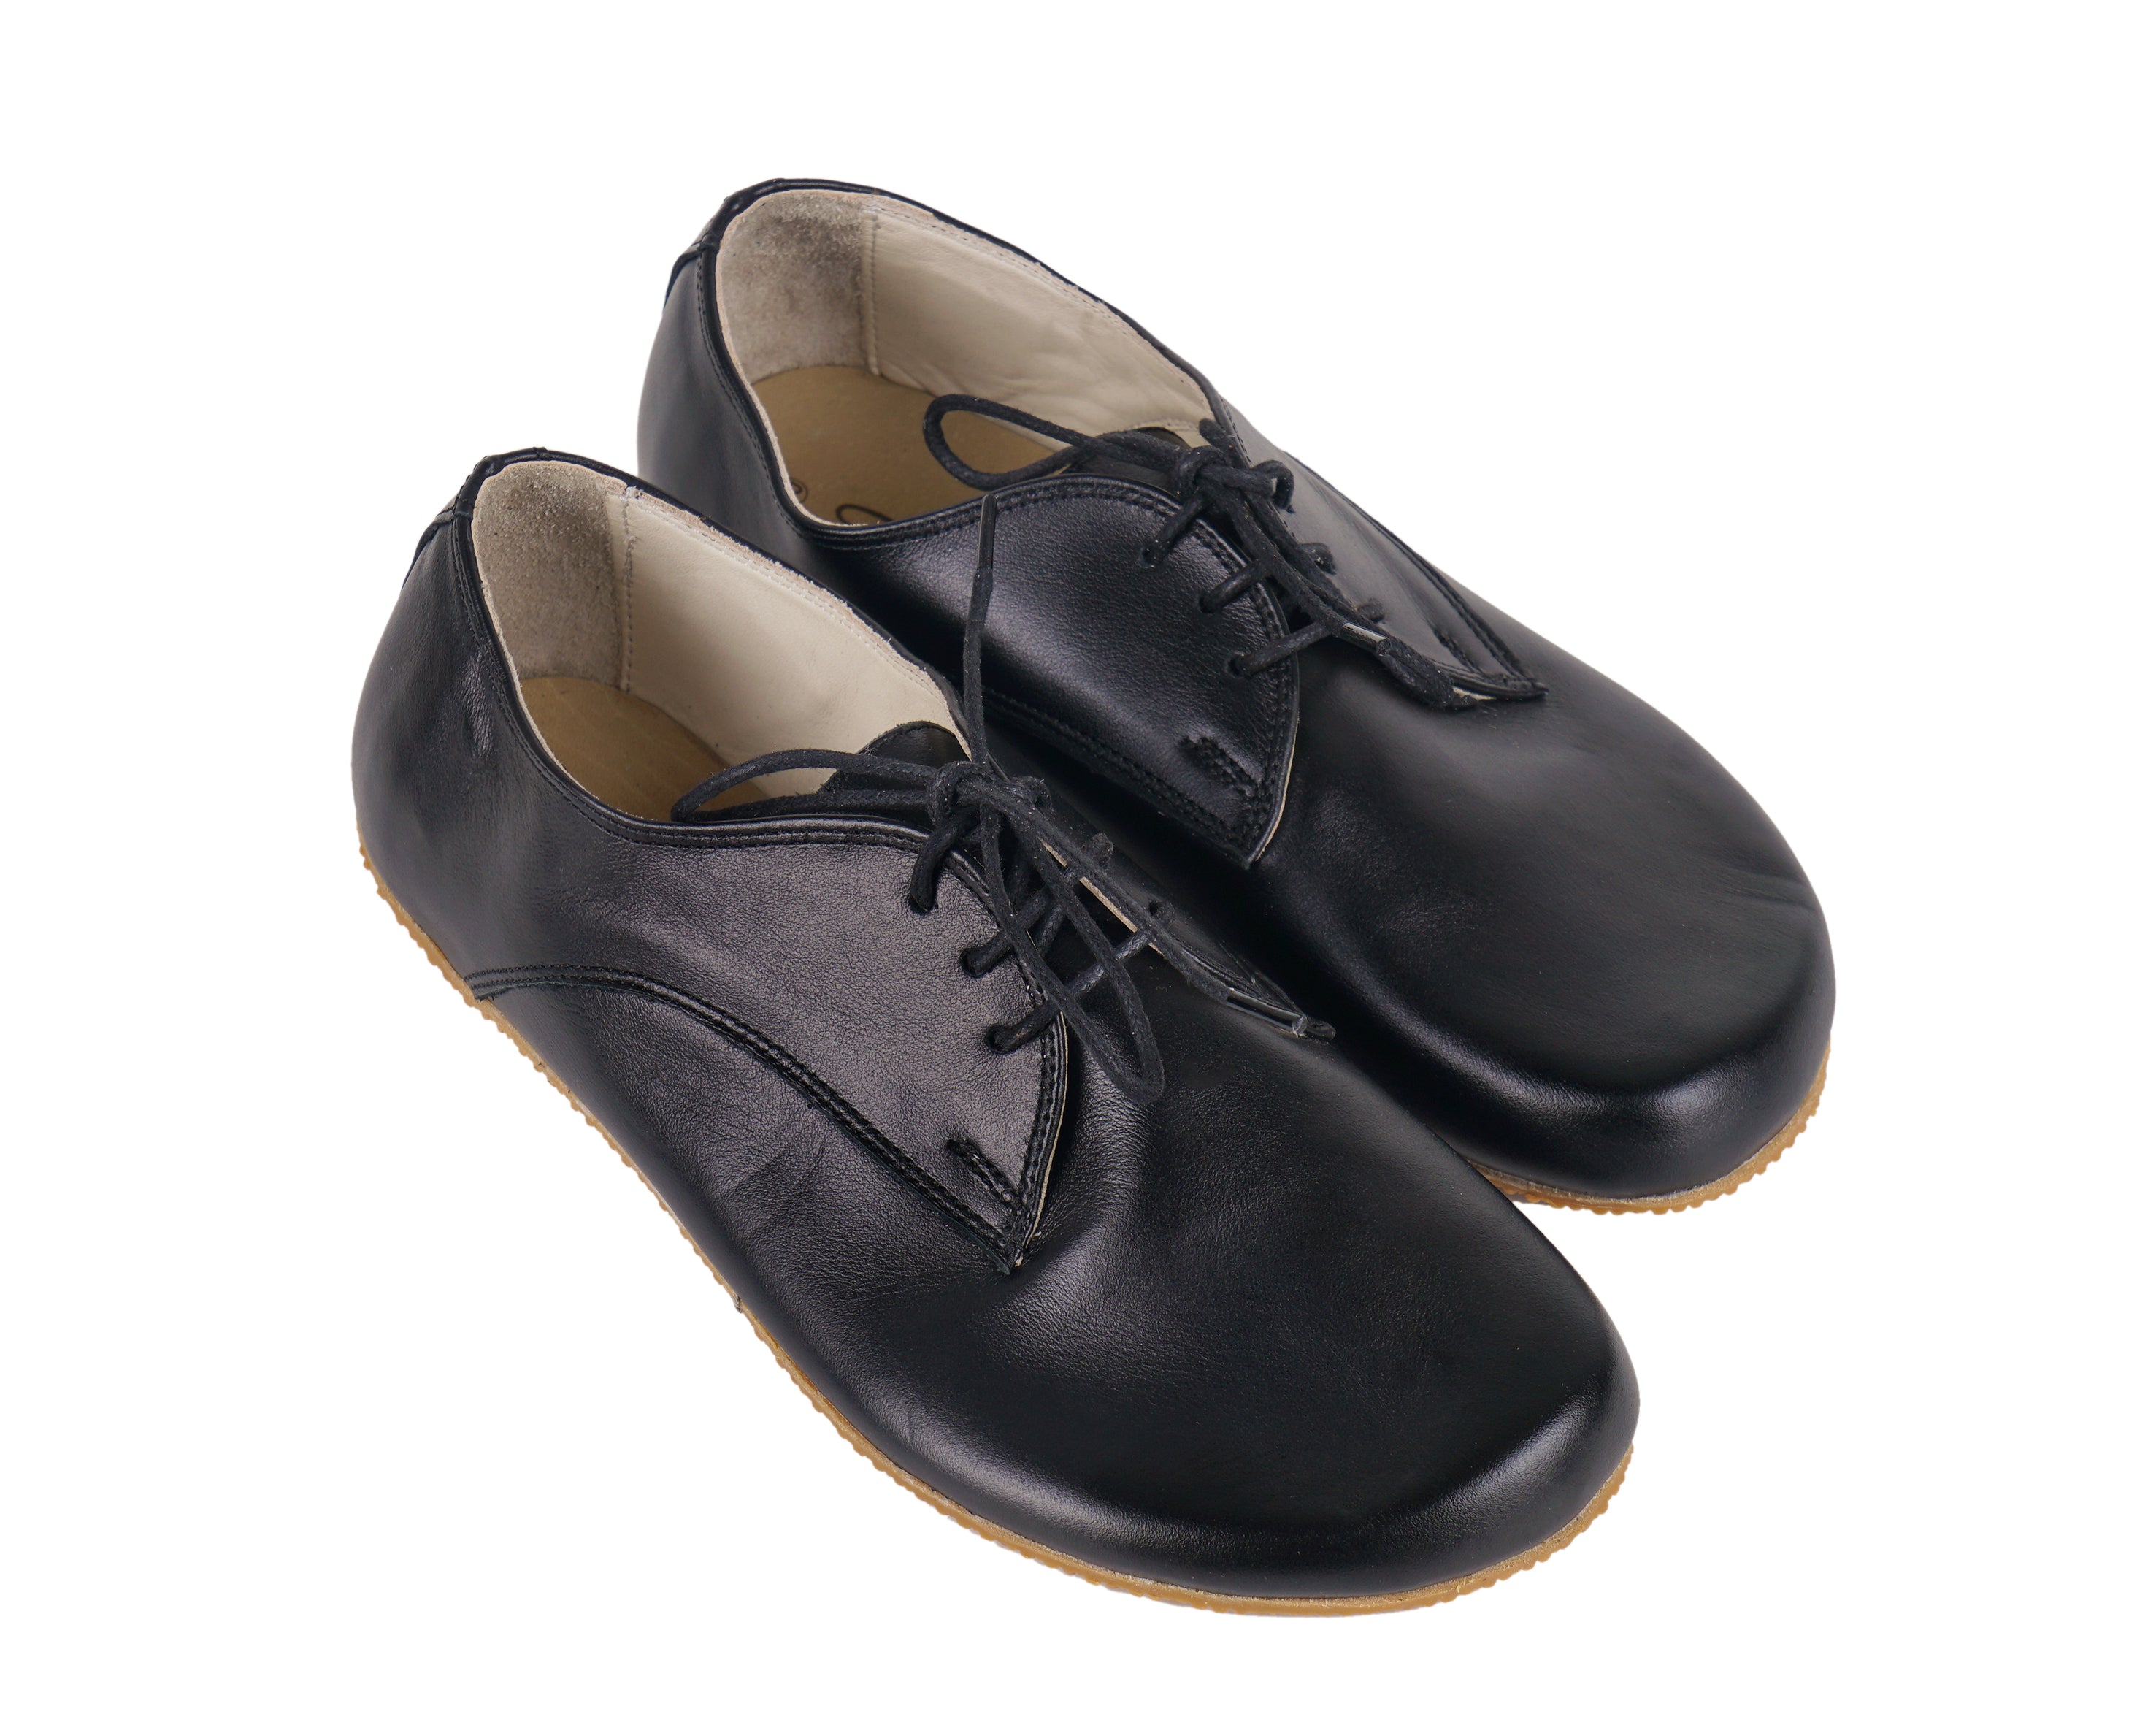 Black Oxford Wide Barefoot Shoes Smooth Leather Handmade 4mm Rubber Outsole